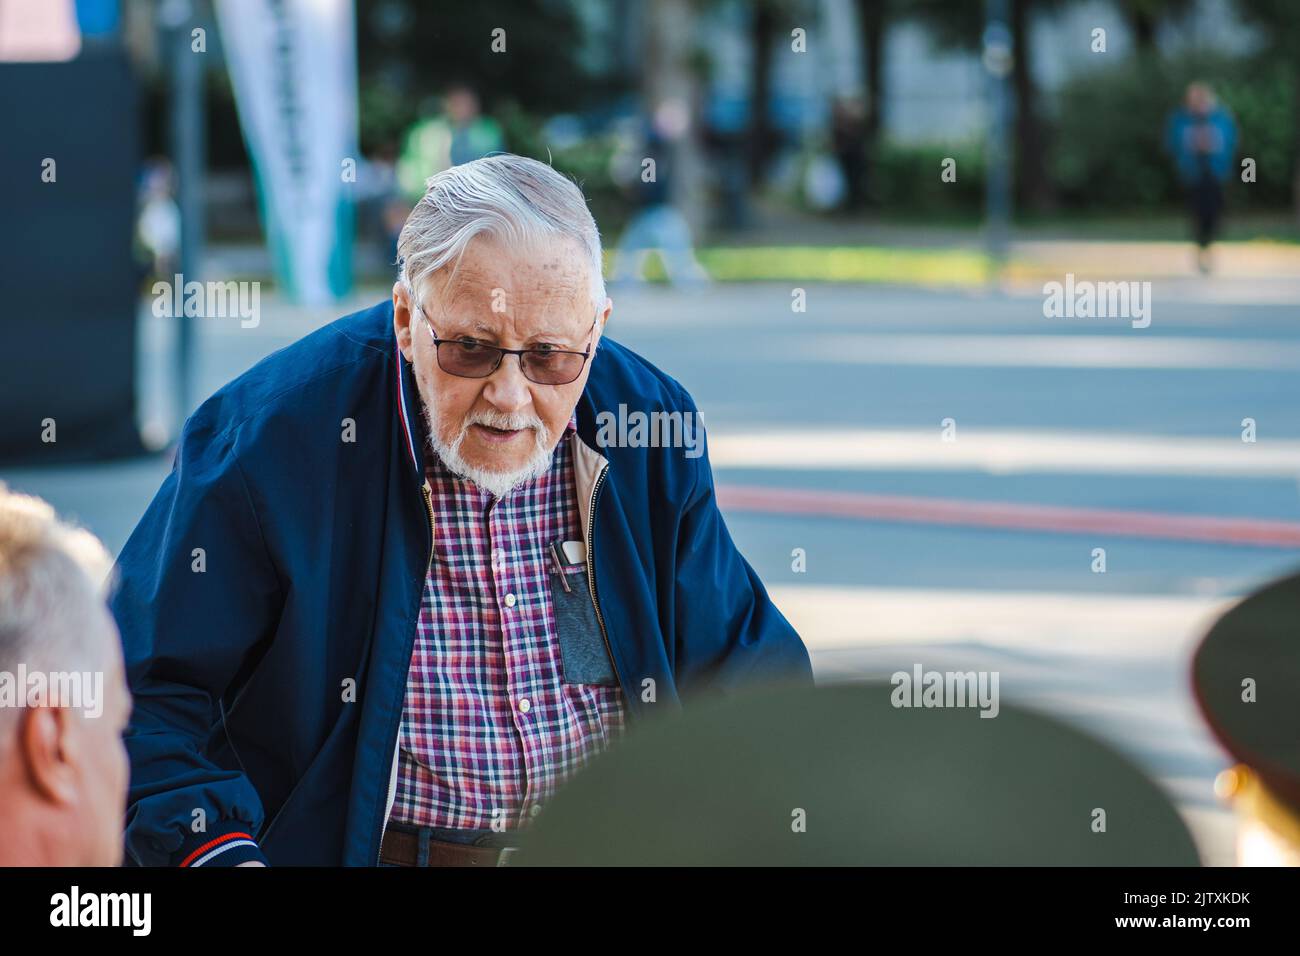 Vytautas Landsbergis, Lithuanian politician and former Member of the European Parliament, during a ceremony Stock Photo